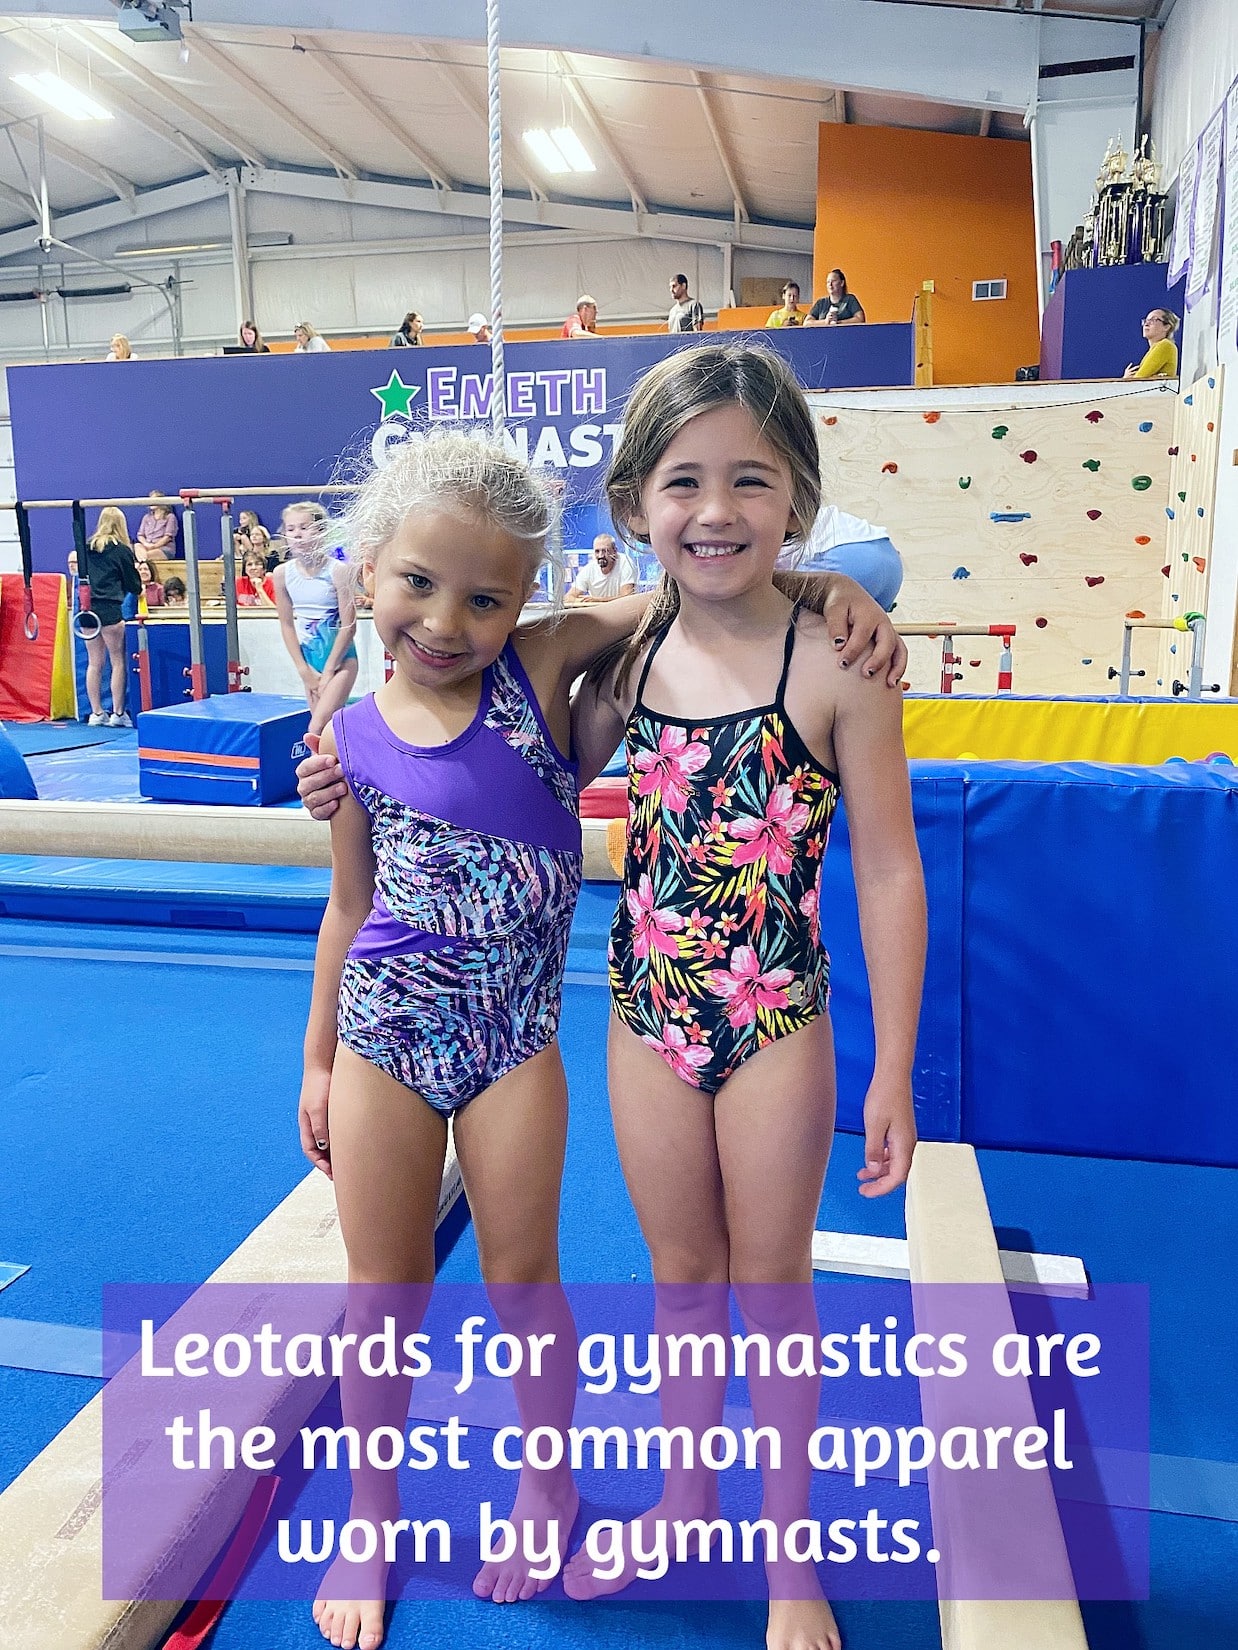 Are Leotards for Gymnastics the Only Option for Kids?